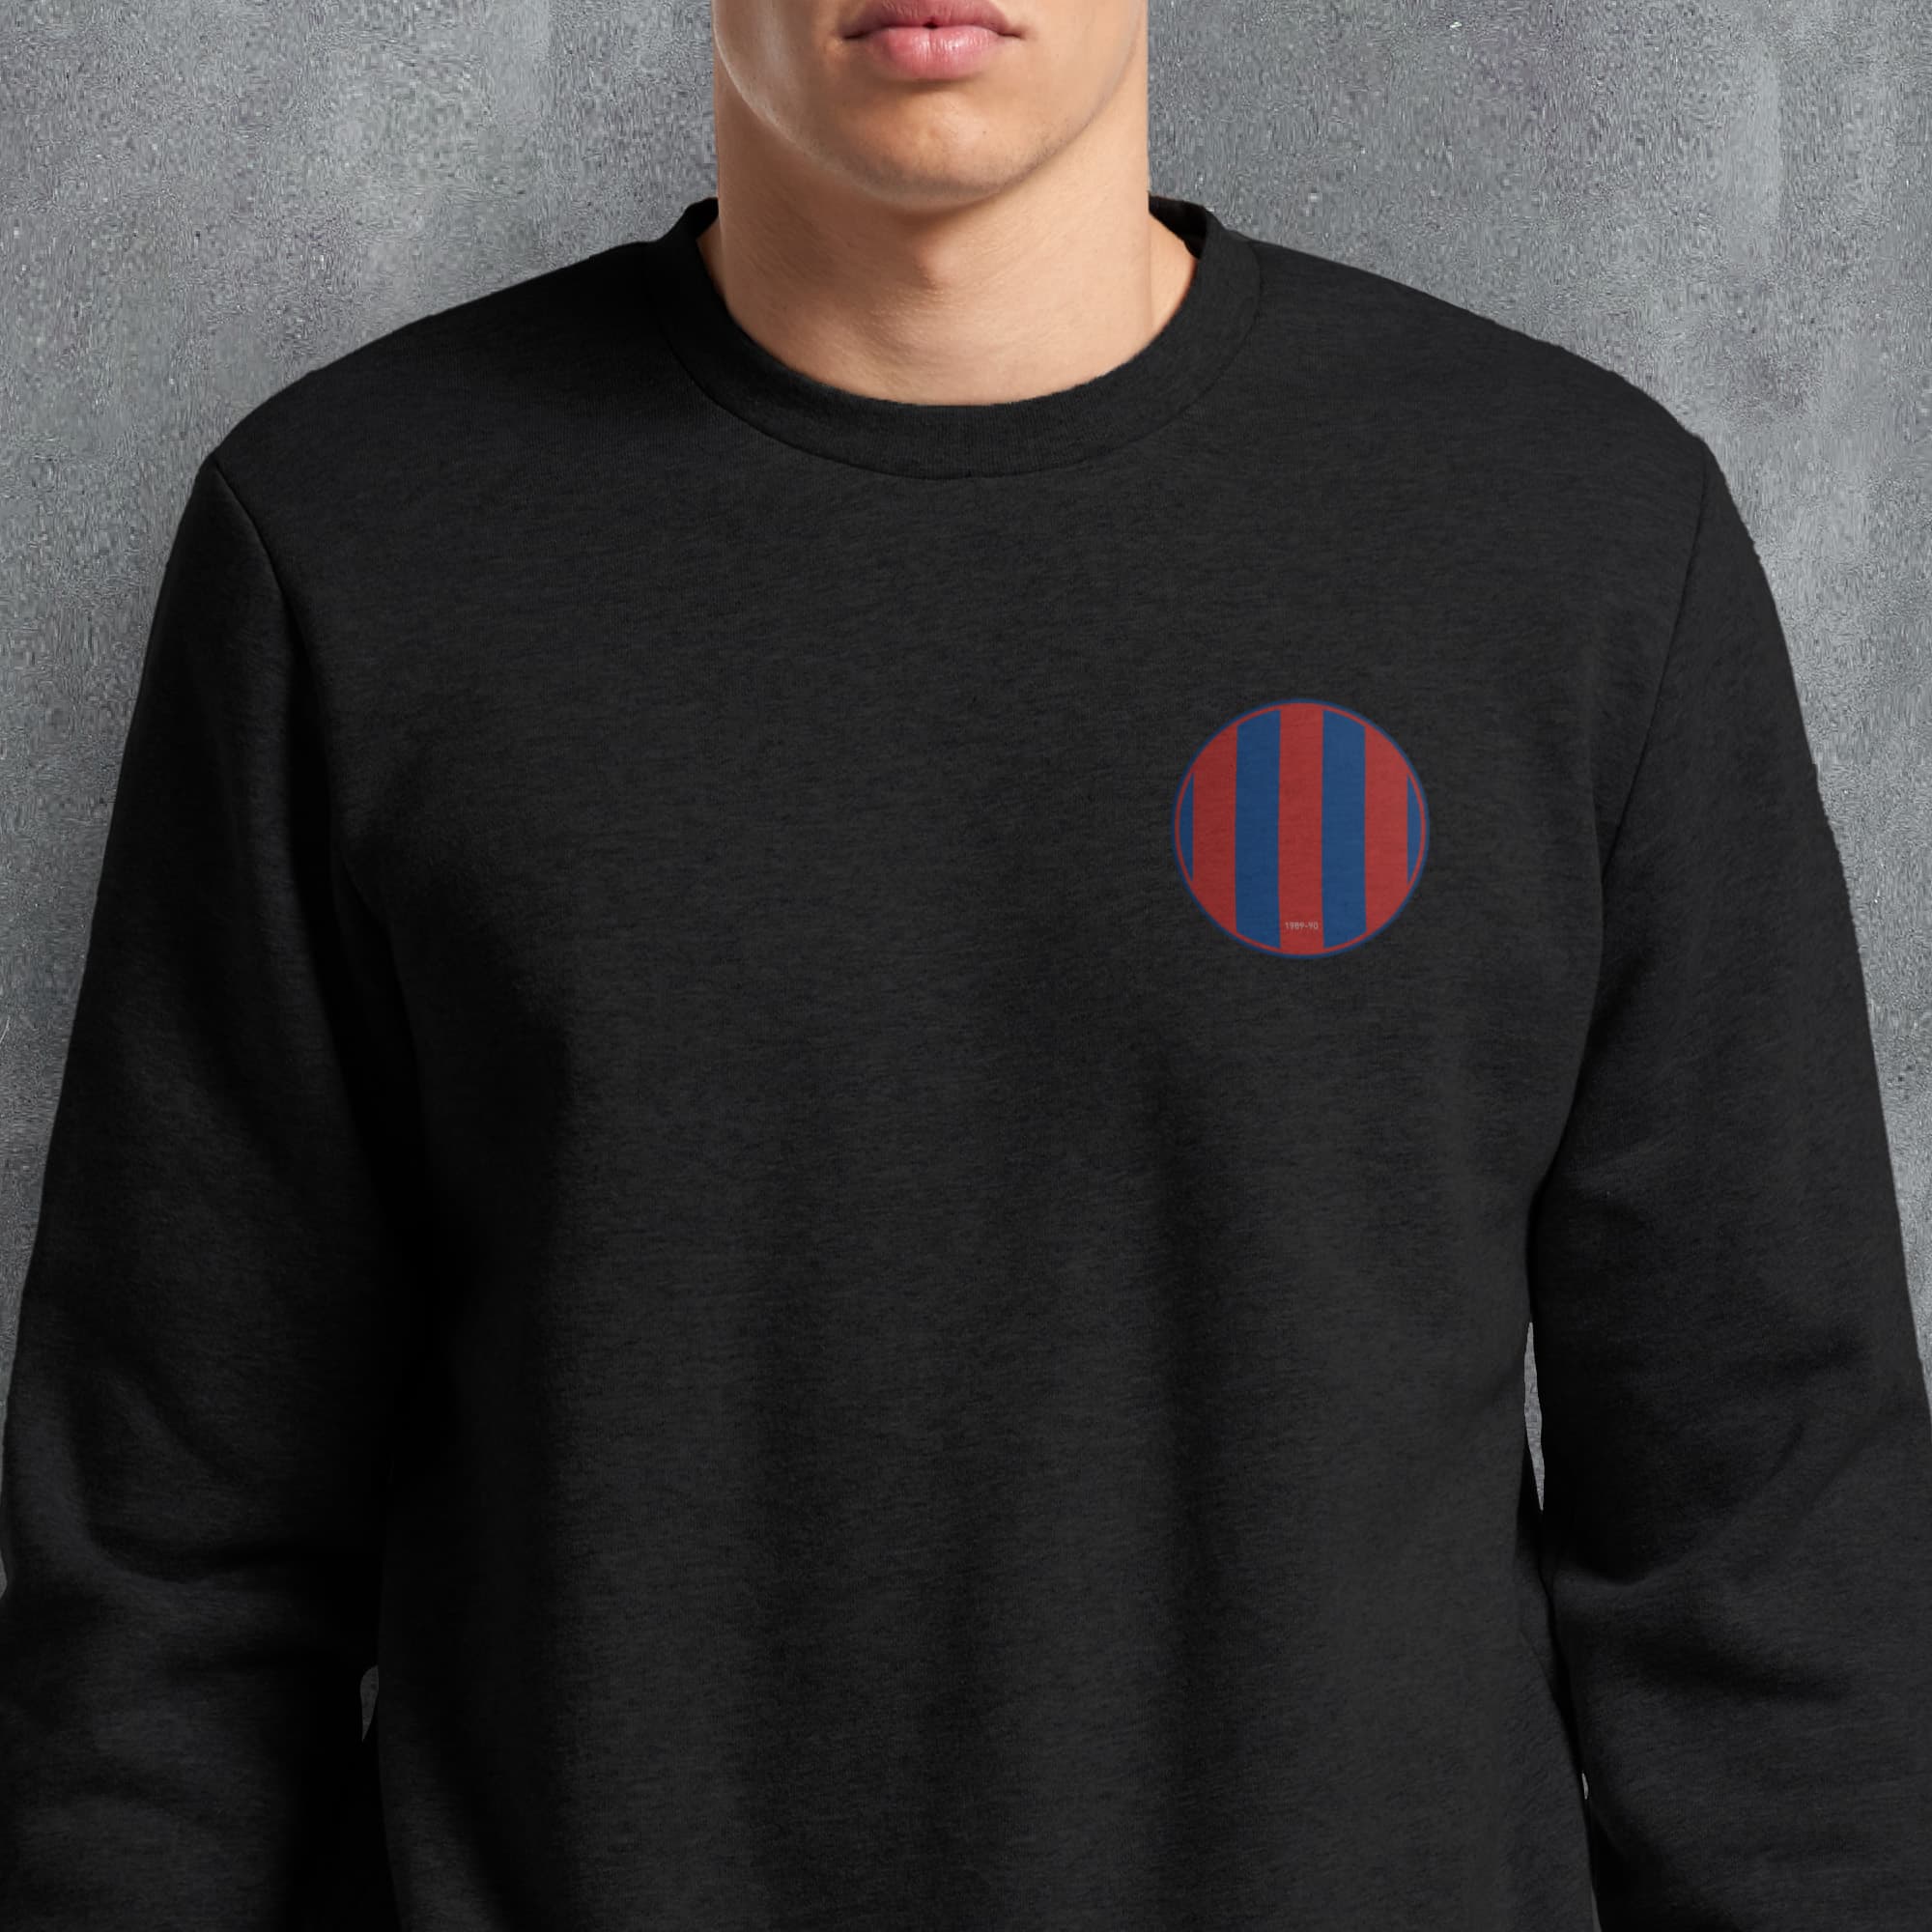 a man wearing a black sweatshirt with a red and blue circle on it